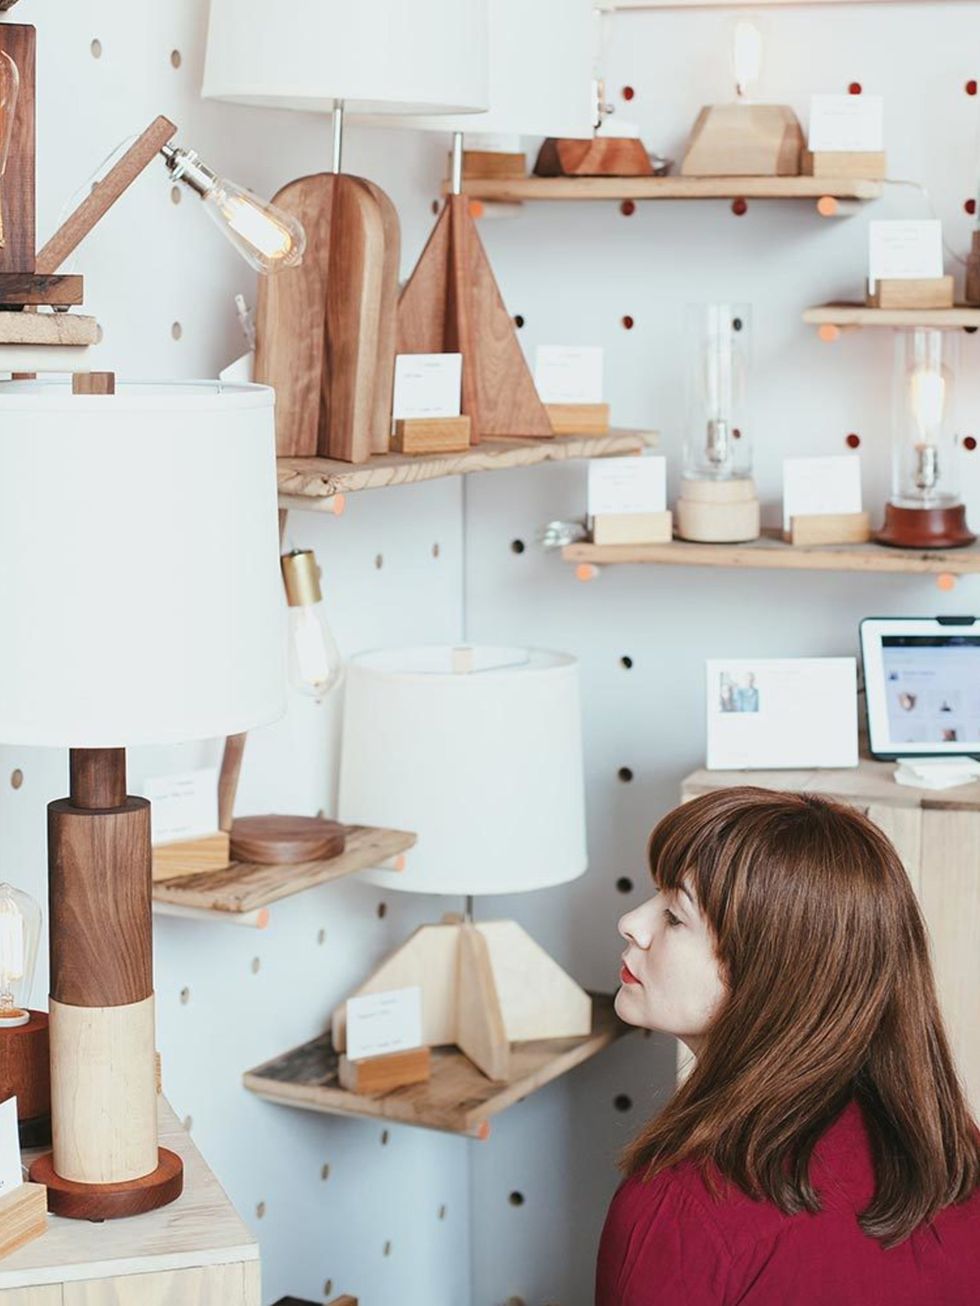 <p><strong>SHOPPING: Etsy Pop-Up Shop </strong></p>

<p>Etsy has handpicked some of its best designers to take part in their Winter pop-up where every item on sale is handmade by its seller.  During the three-day pop-up, designers will host workshops on h